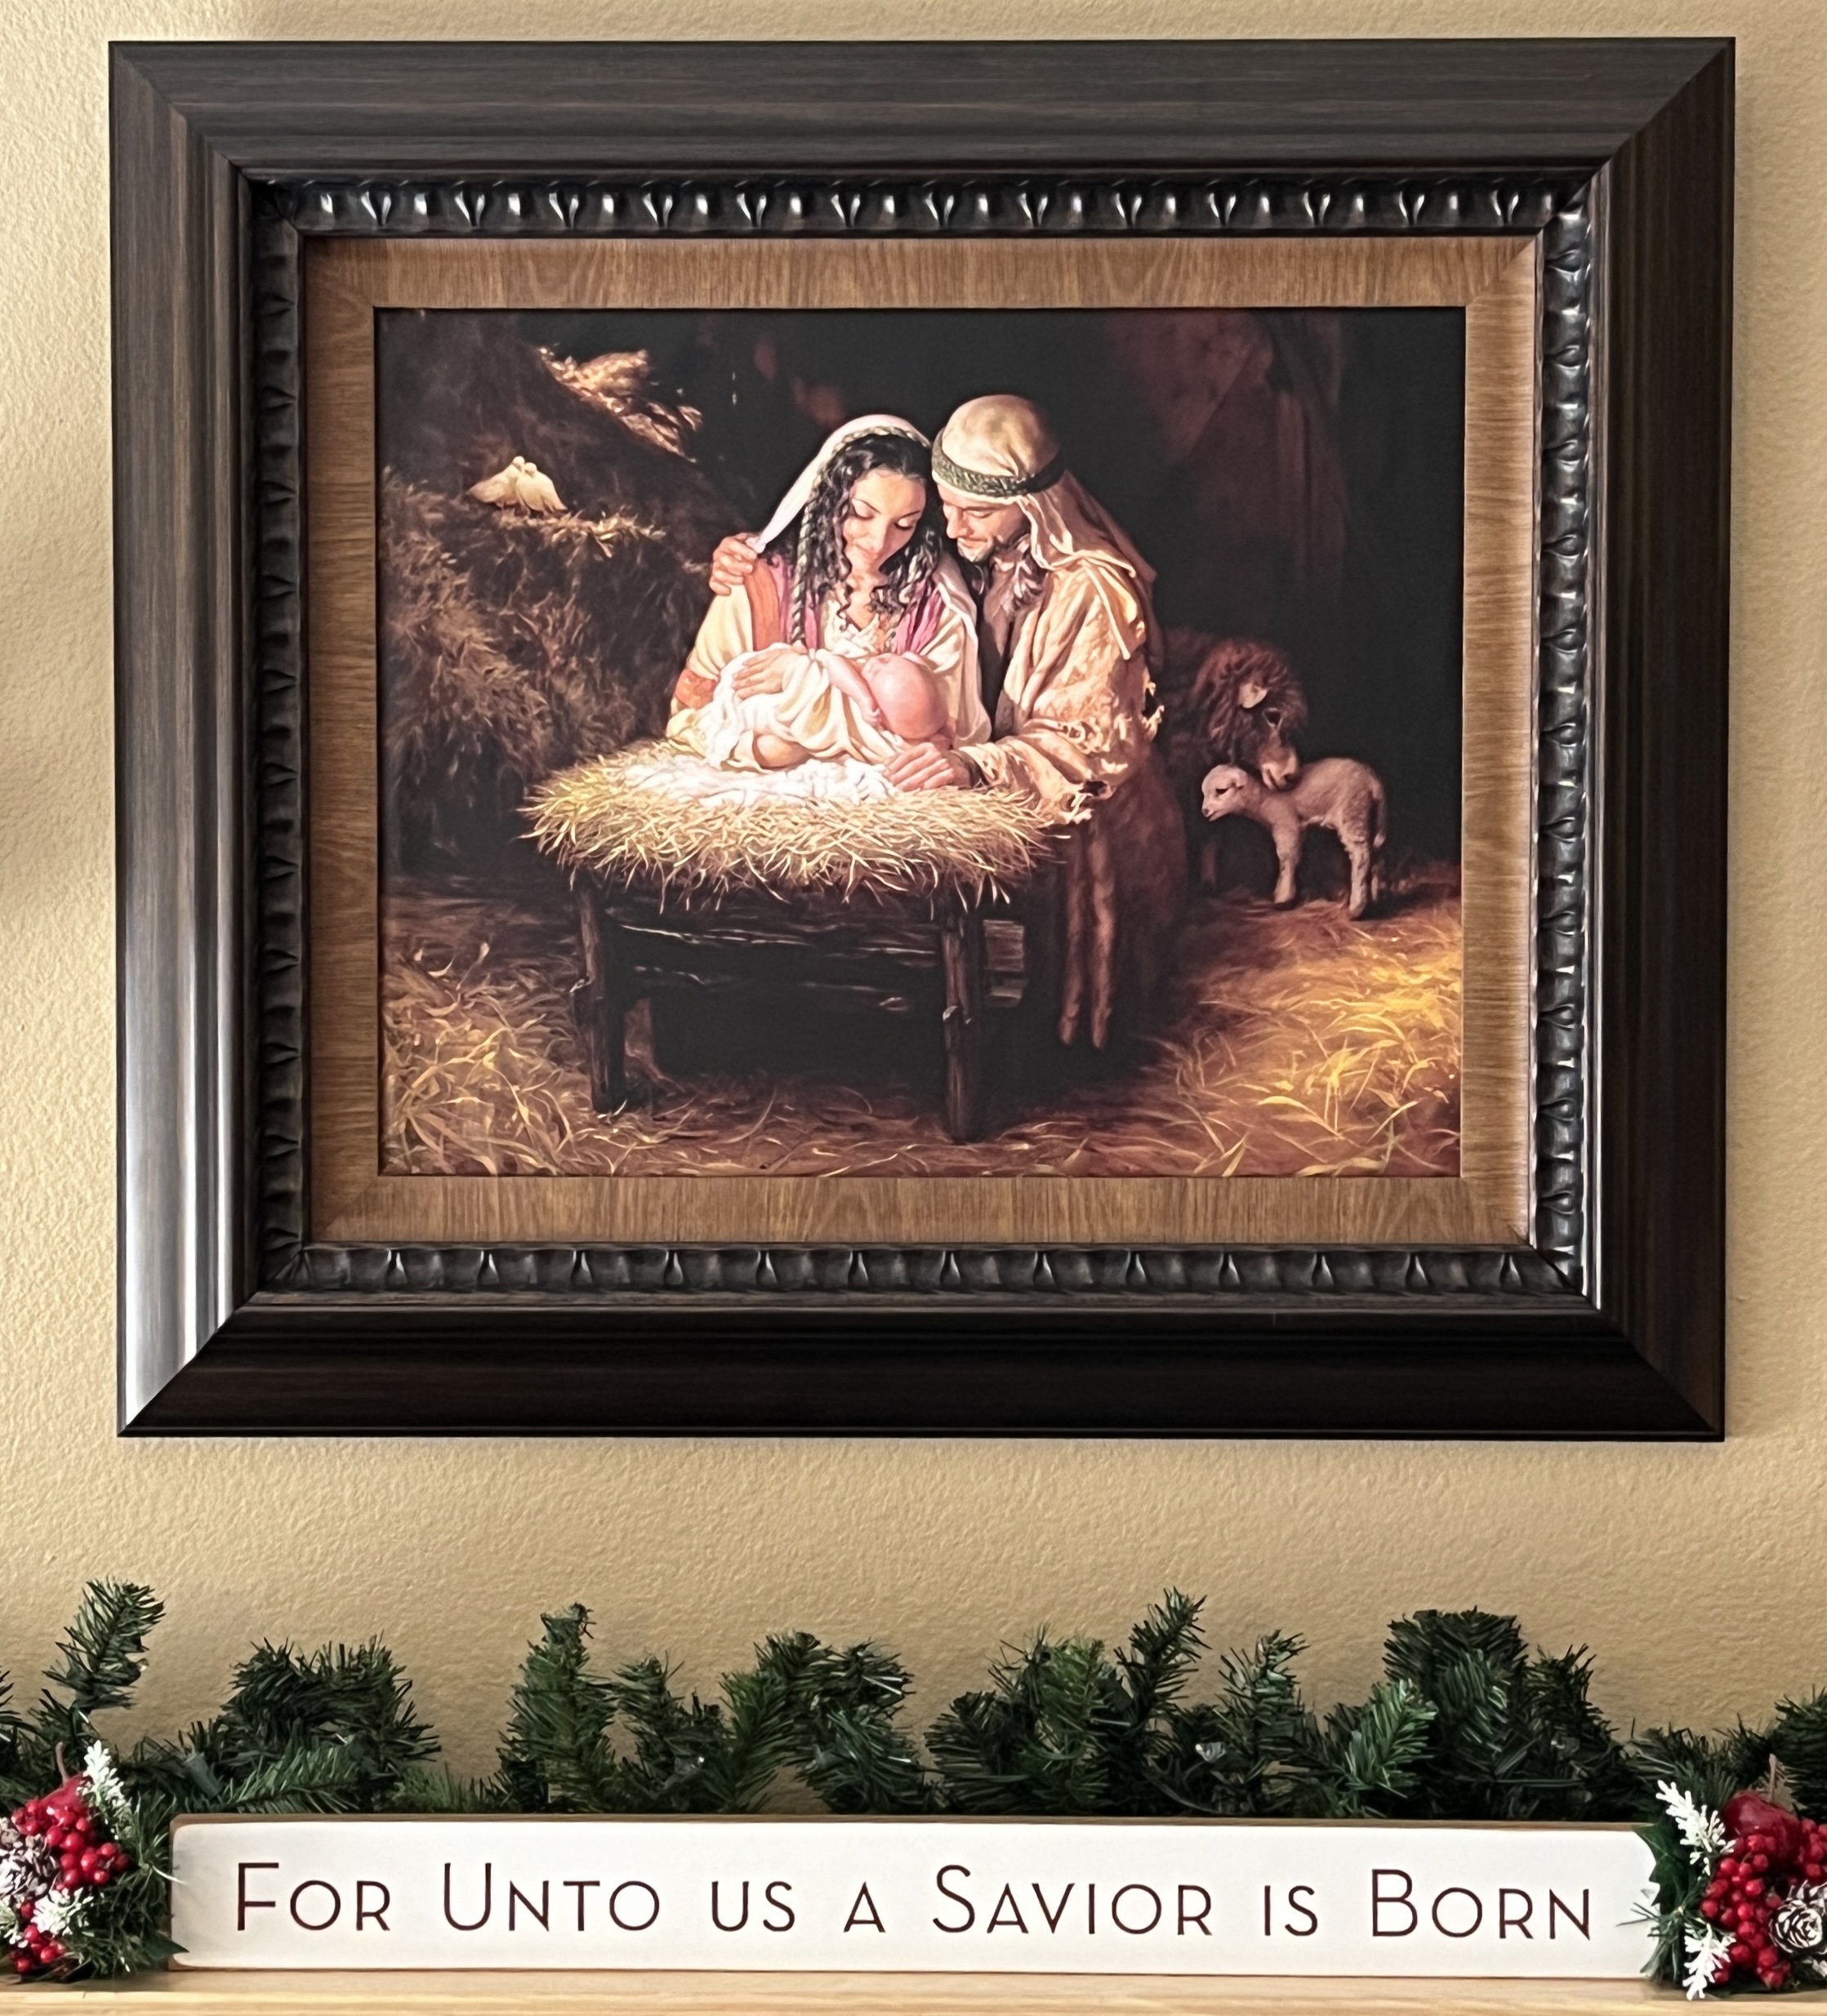 Can You Tell the Story of Jesus’ Birth?